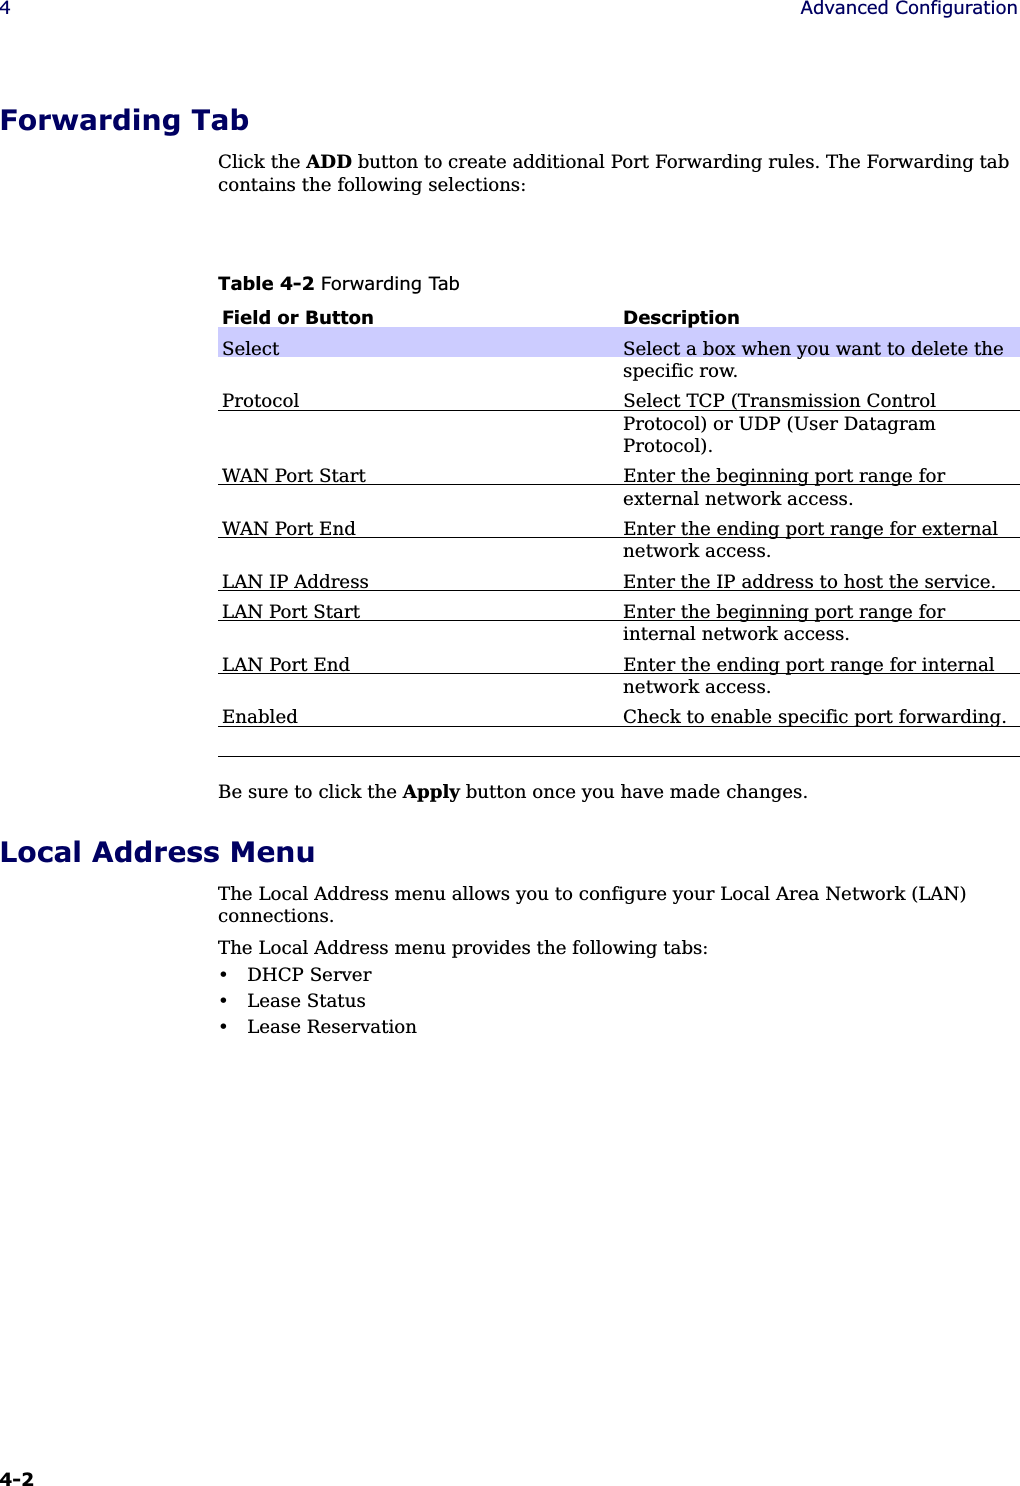 4-2 4Advanced ConfigurationForwarding TabClick the ADD button to create additional Port Forwarding rules. The Forwarding tab contains the following selections:Be sure to click the Apply button once you have made changes.Local Address MenuThe Local Address menu allows you to configure your Local Area Network (LAN) connections.The Local Address menu provides the following tabs:• DHCP Server• Lease Status• Lease ReservationTable 4-2 Forwarding TabField or Button DescriptionSelect Select a box when you want to delete the specific row.Protocol Select TCP (Transmission Control Protocol) or UDP (User Datagram Protocol).WAN Port Start Enter the beginning port range for external network access.WAN Port End Enter the ending port range for external network access.LAN IP Address Enter the IP address to host the service.LAN Port Start Enter the beginning port range for internal network access.LAN Port End Enter the ending port range for internal network access.Enabled Check to enable specific port forwarding.